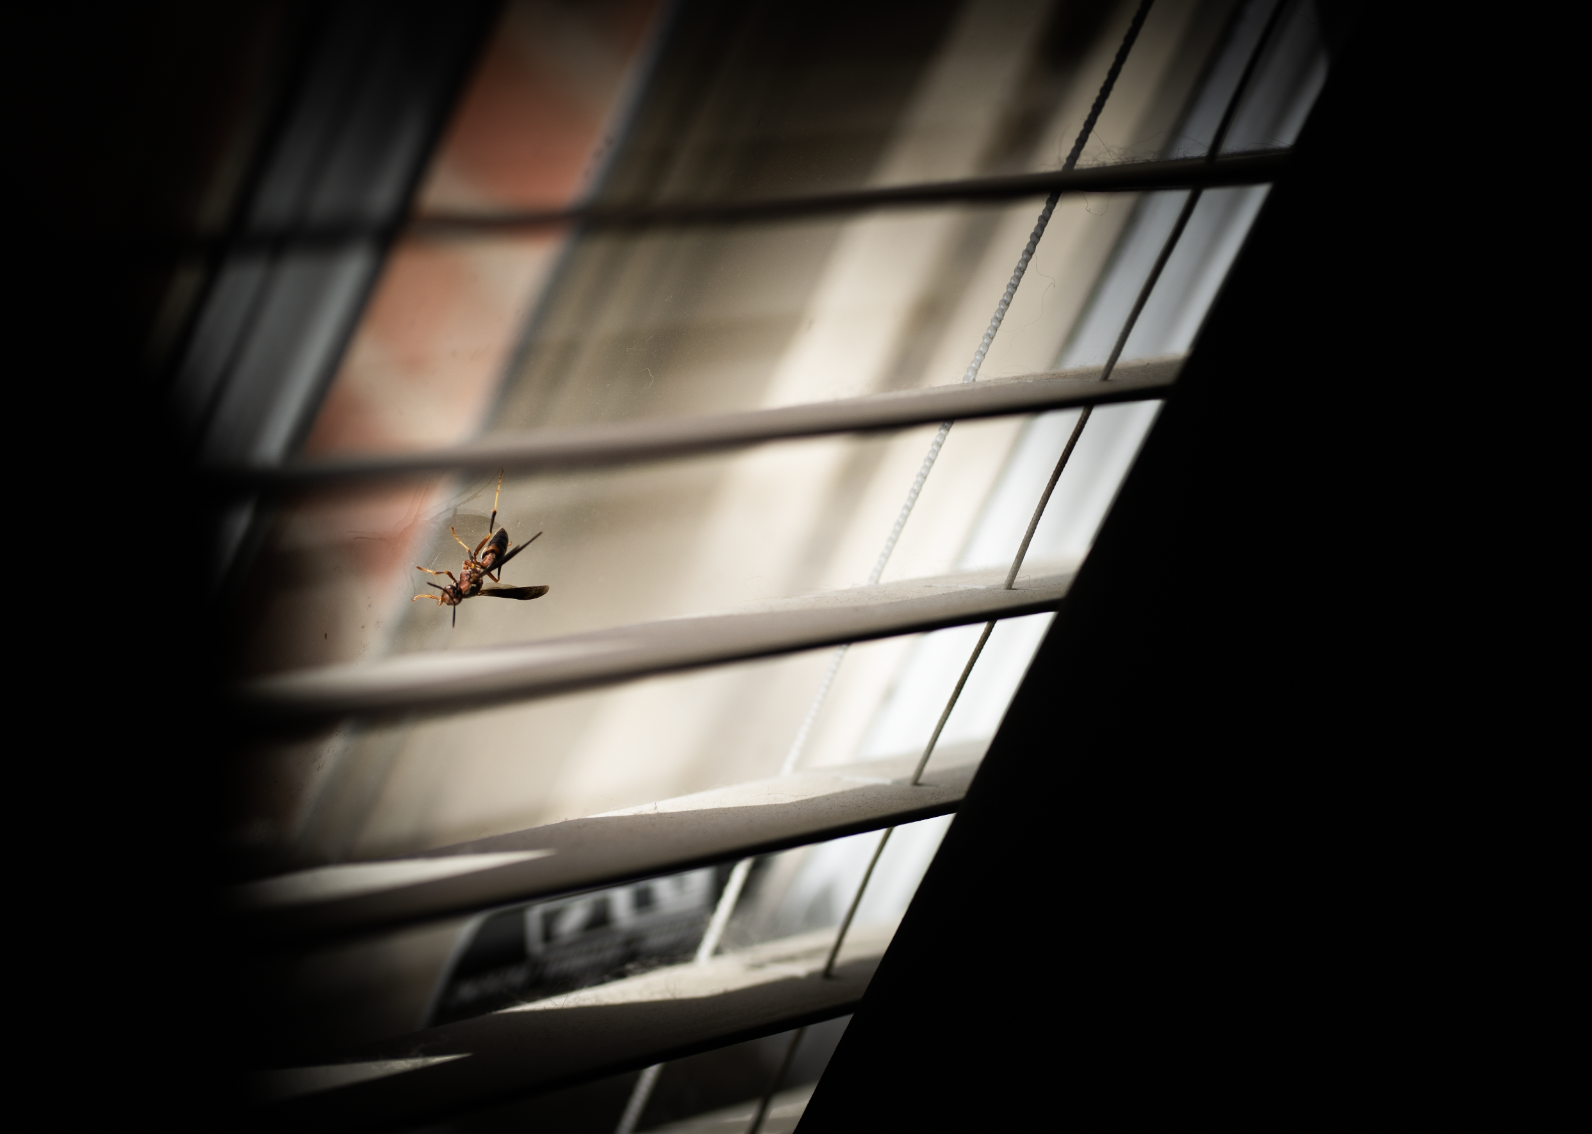 Wasp crawling on a window with late afternoon sun shinning in